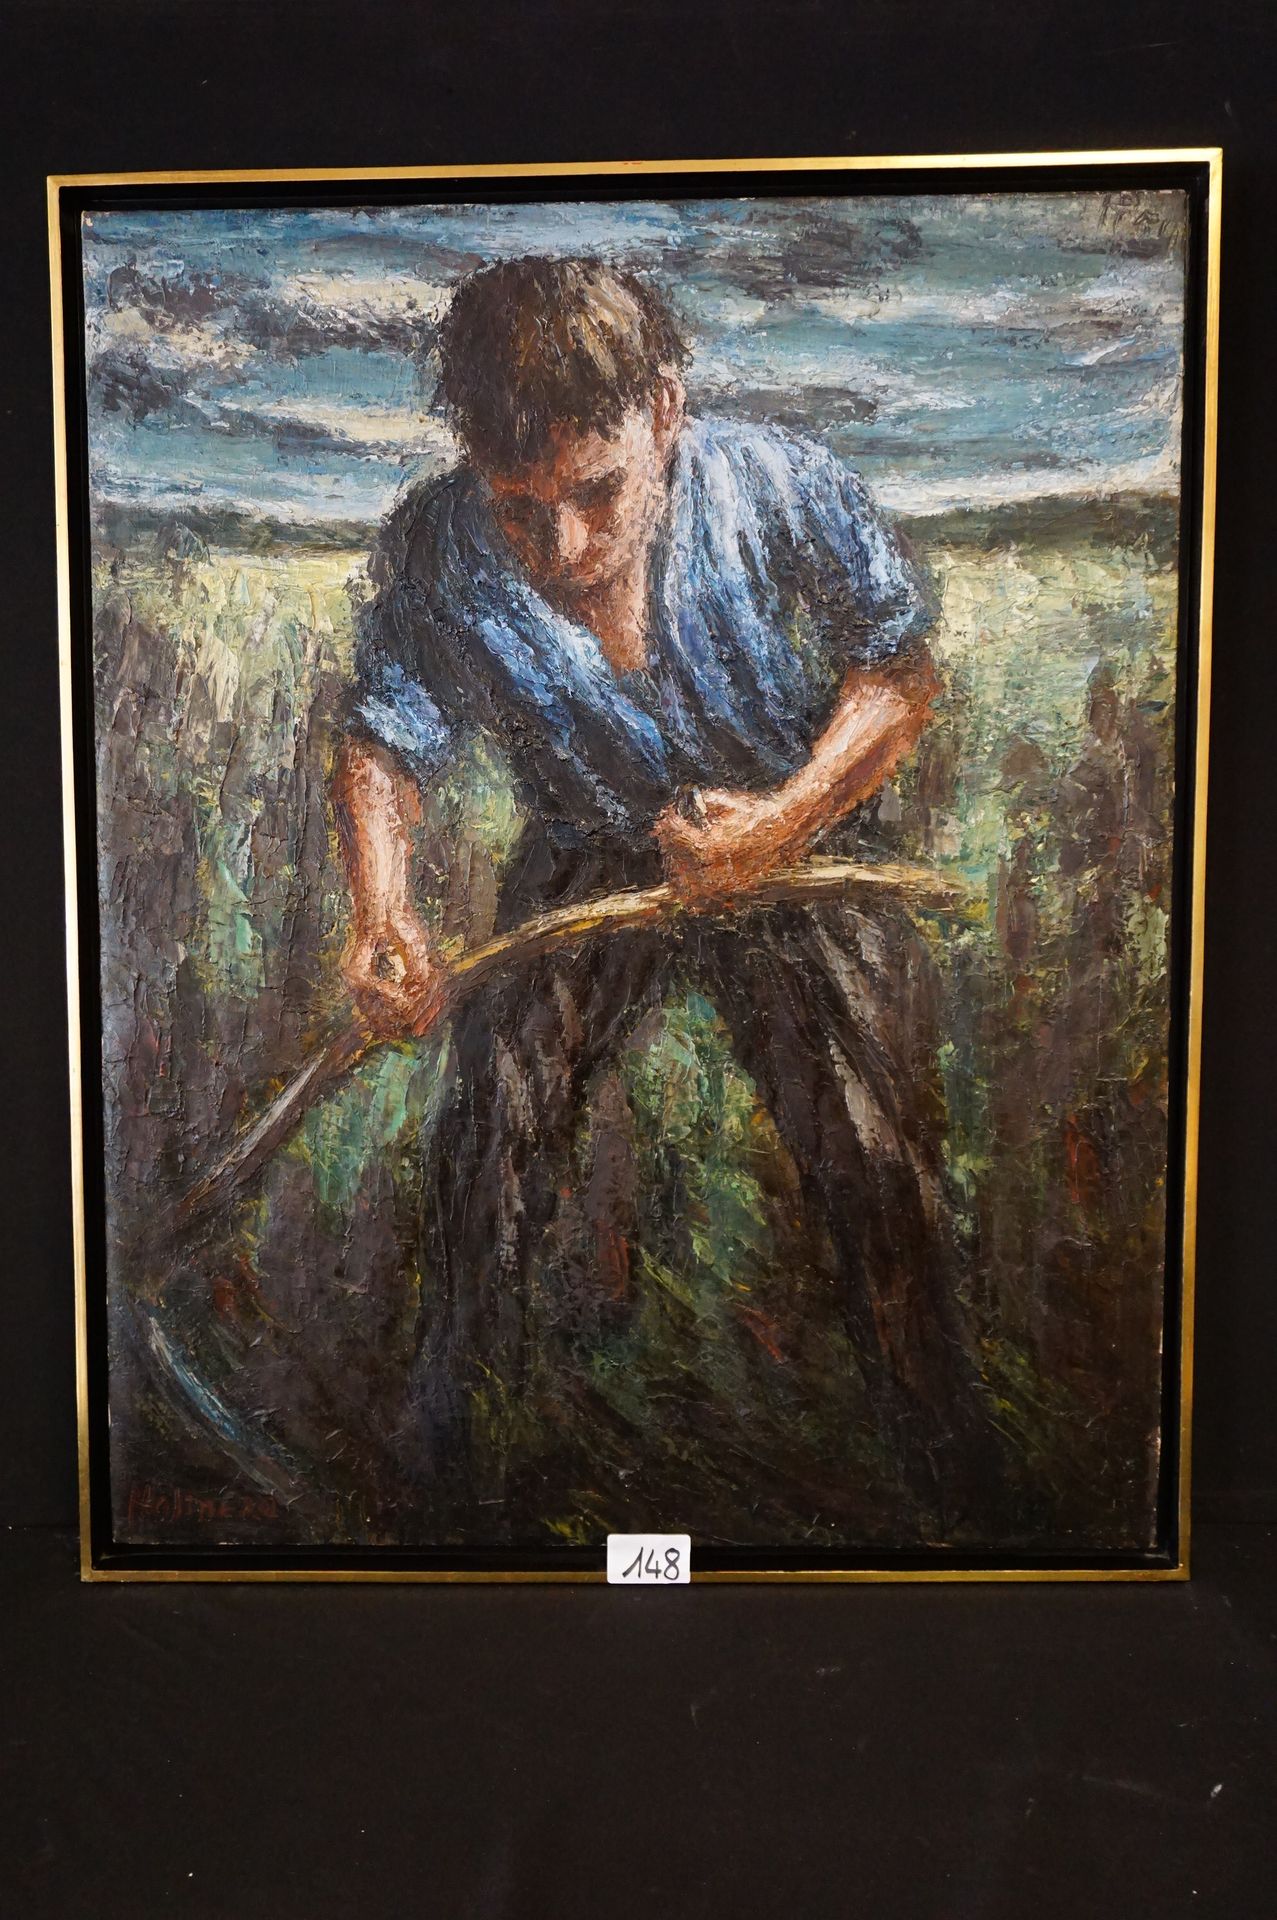 CLIFFORD HOLMEAD PHILIPS (1889 - 1975) "The mower" - Oil on canvas - Signed - Ba&hellip;